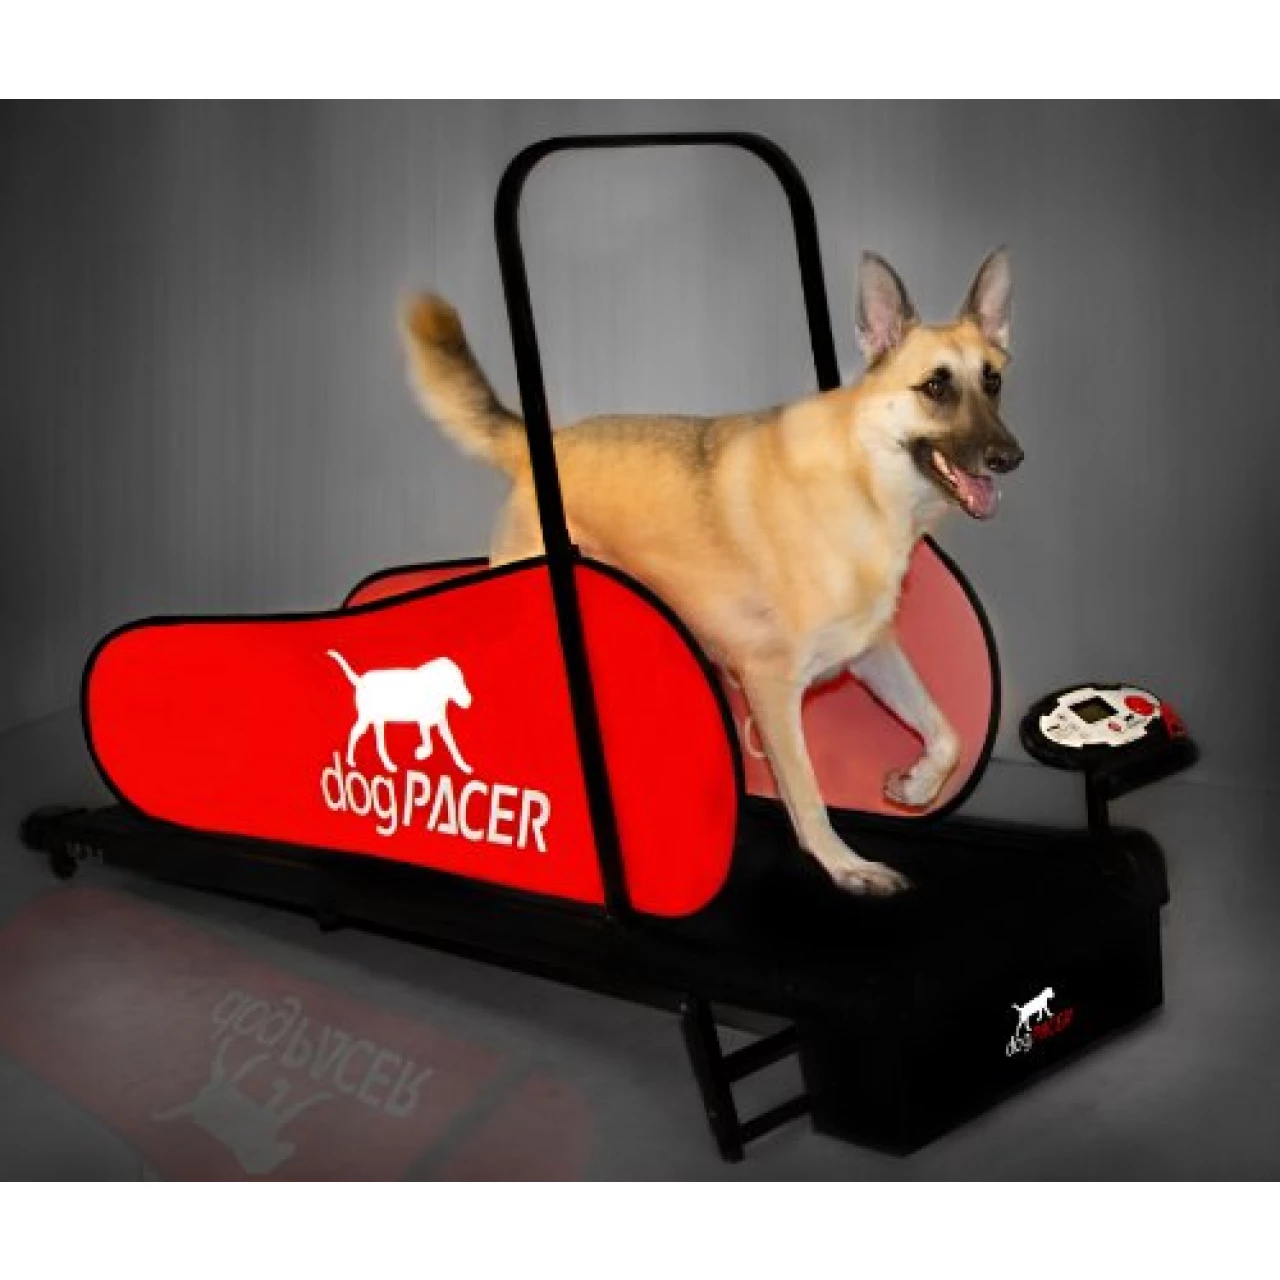 dogPACER 91641 LF 3.1 Full Size Dog Pacer Treadmill, Black and Red